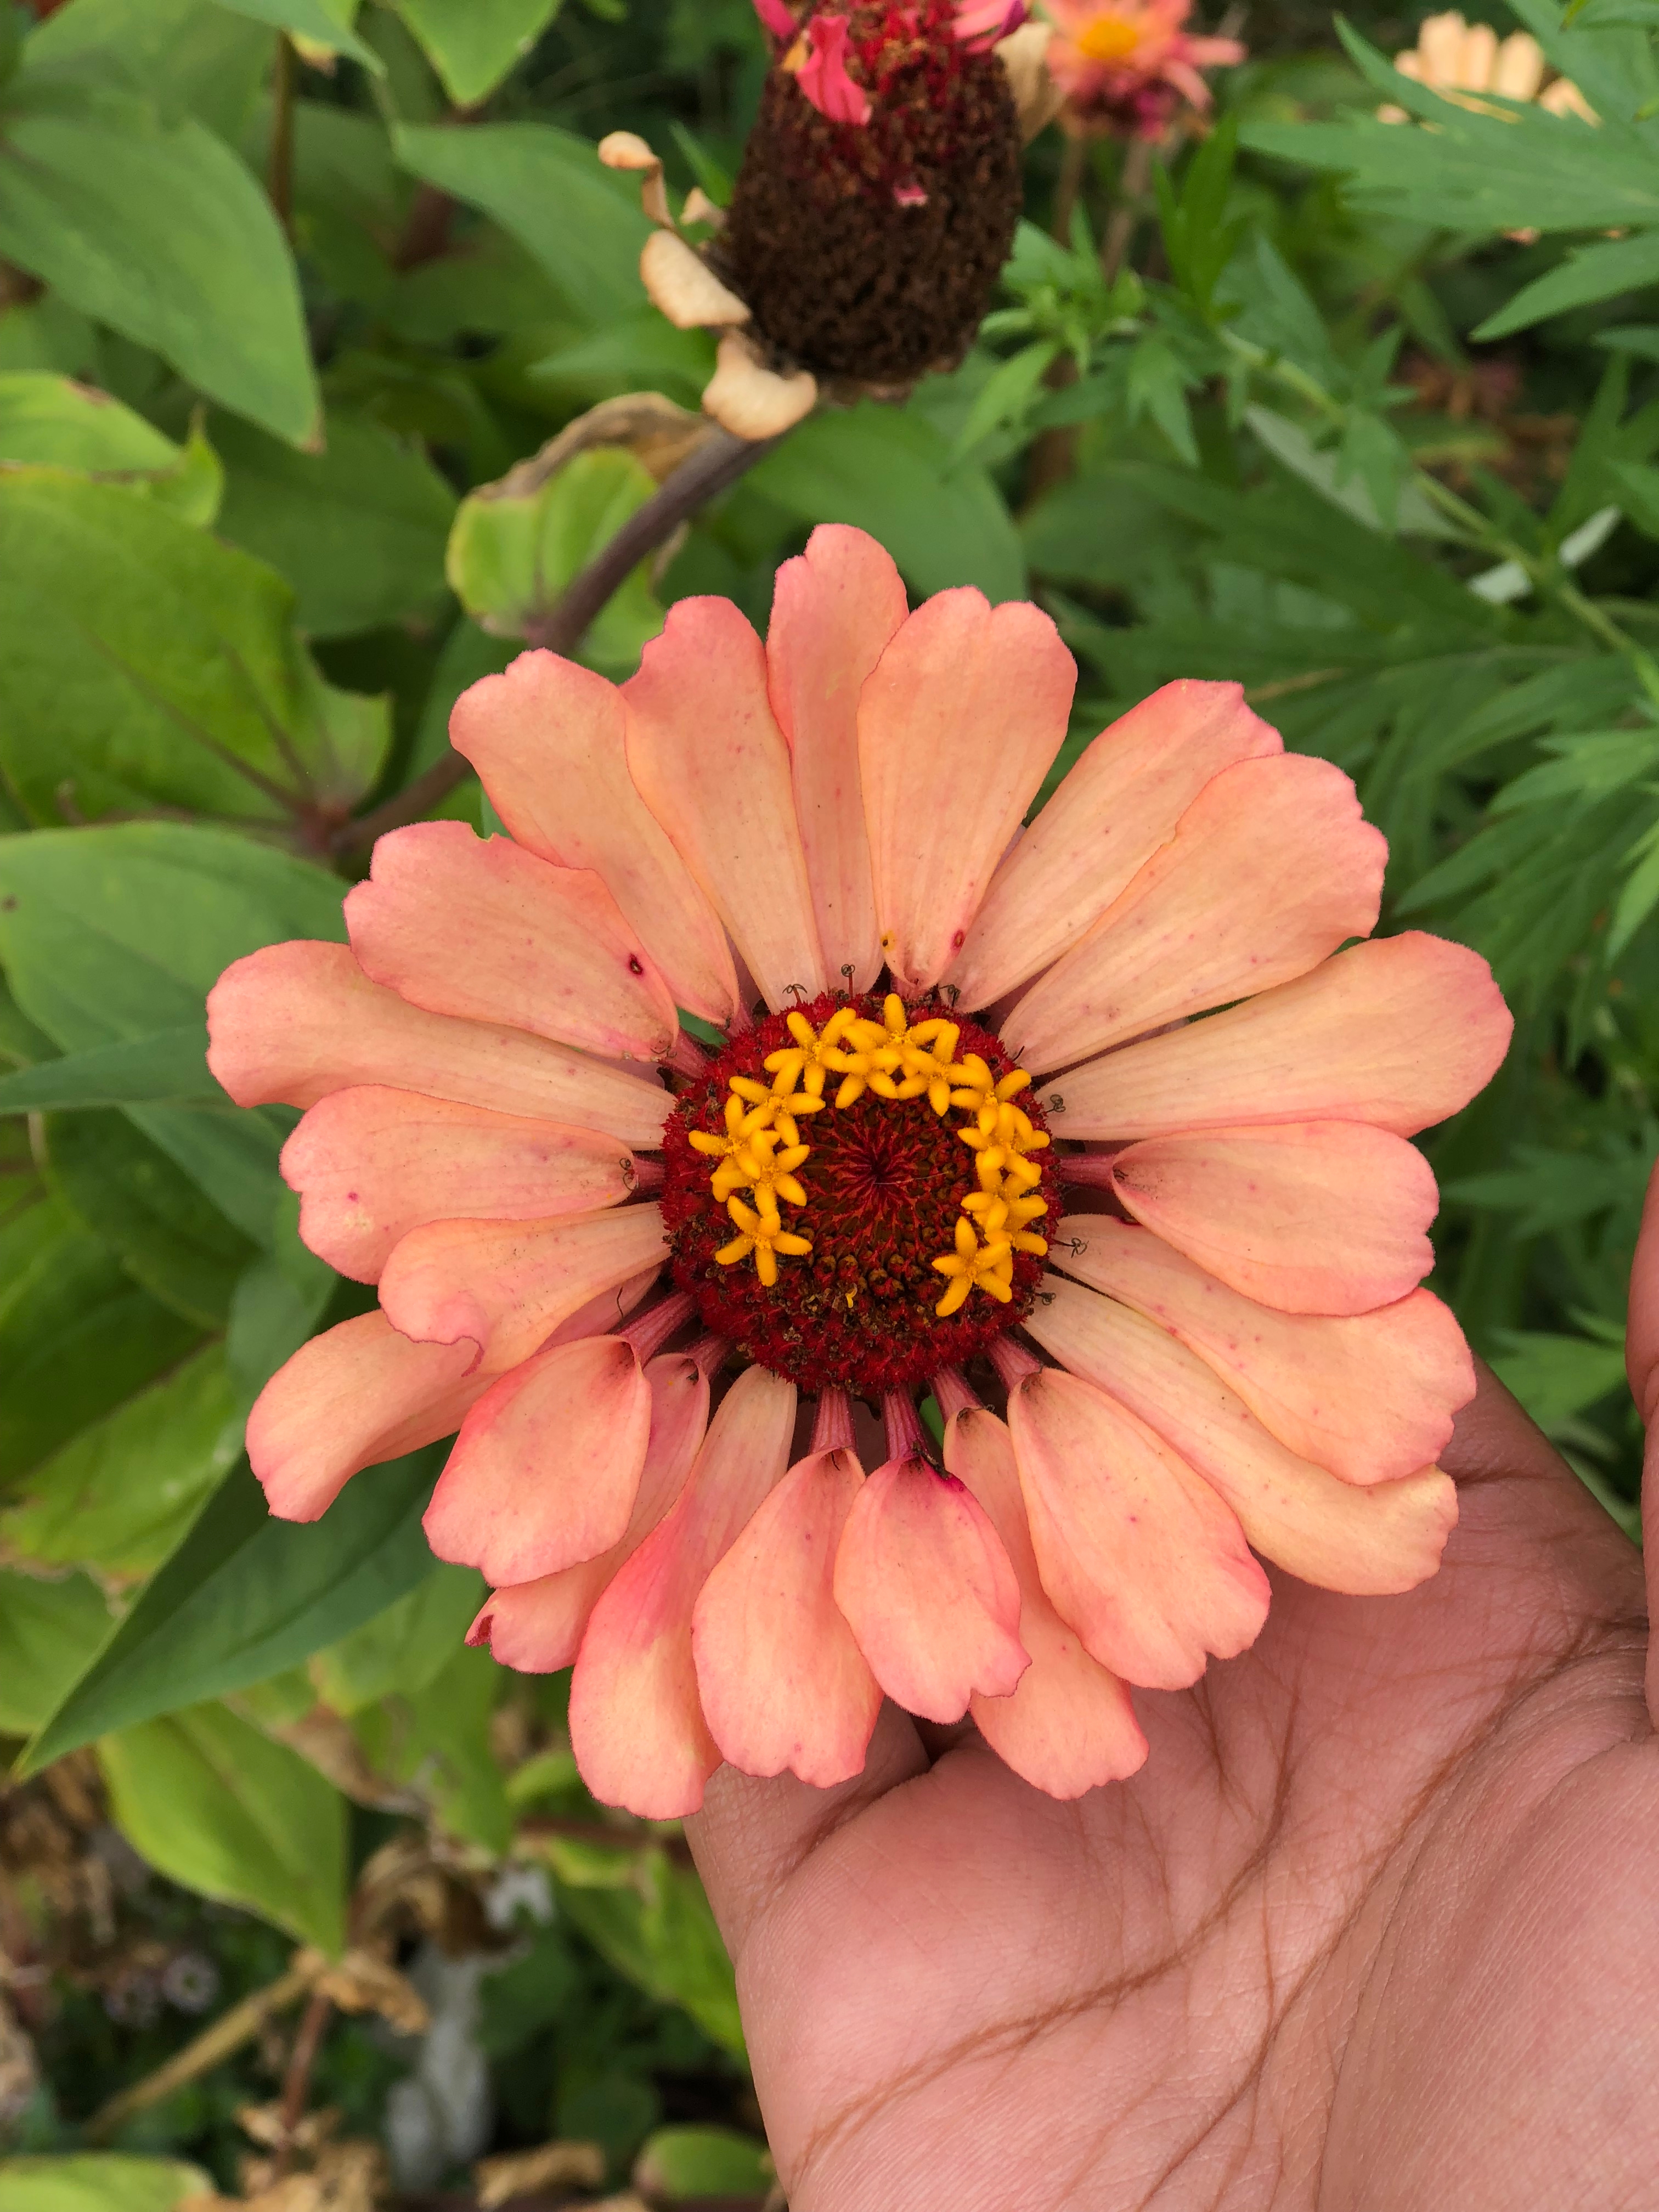 pink multi-petaled flower with a dark red center with tiny yellow blossoms coming out of the center